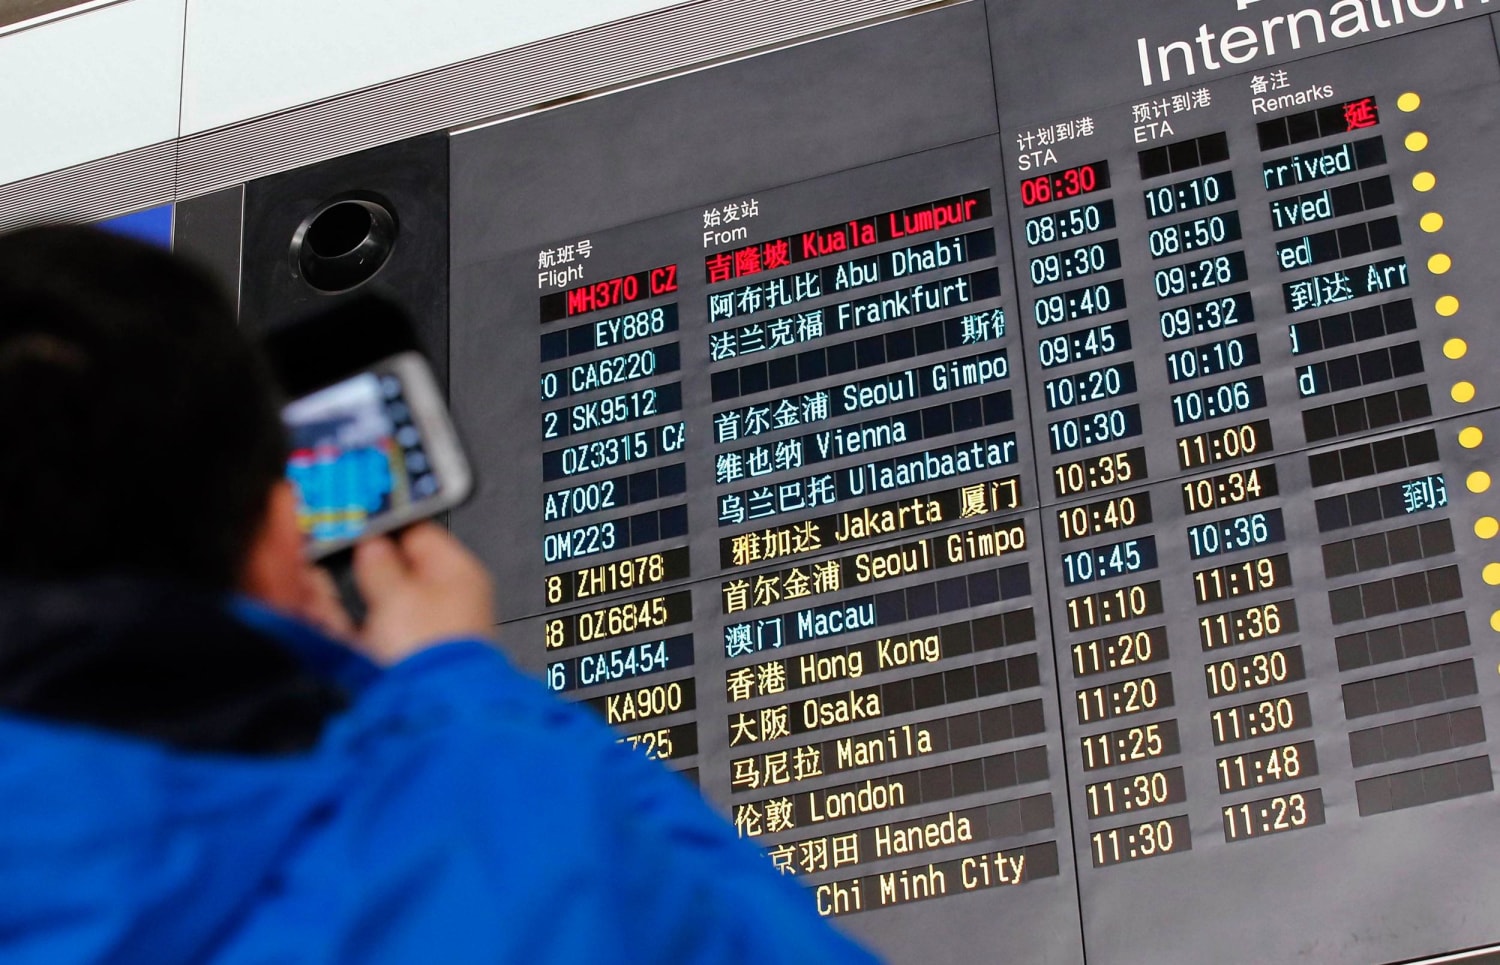 Image: A man takes pictures of a flight information board